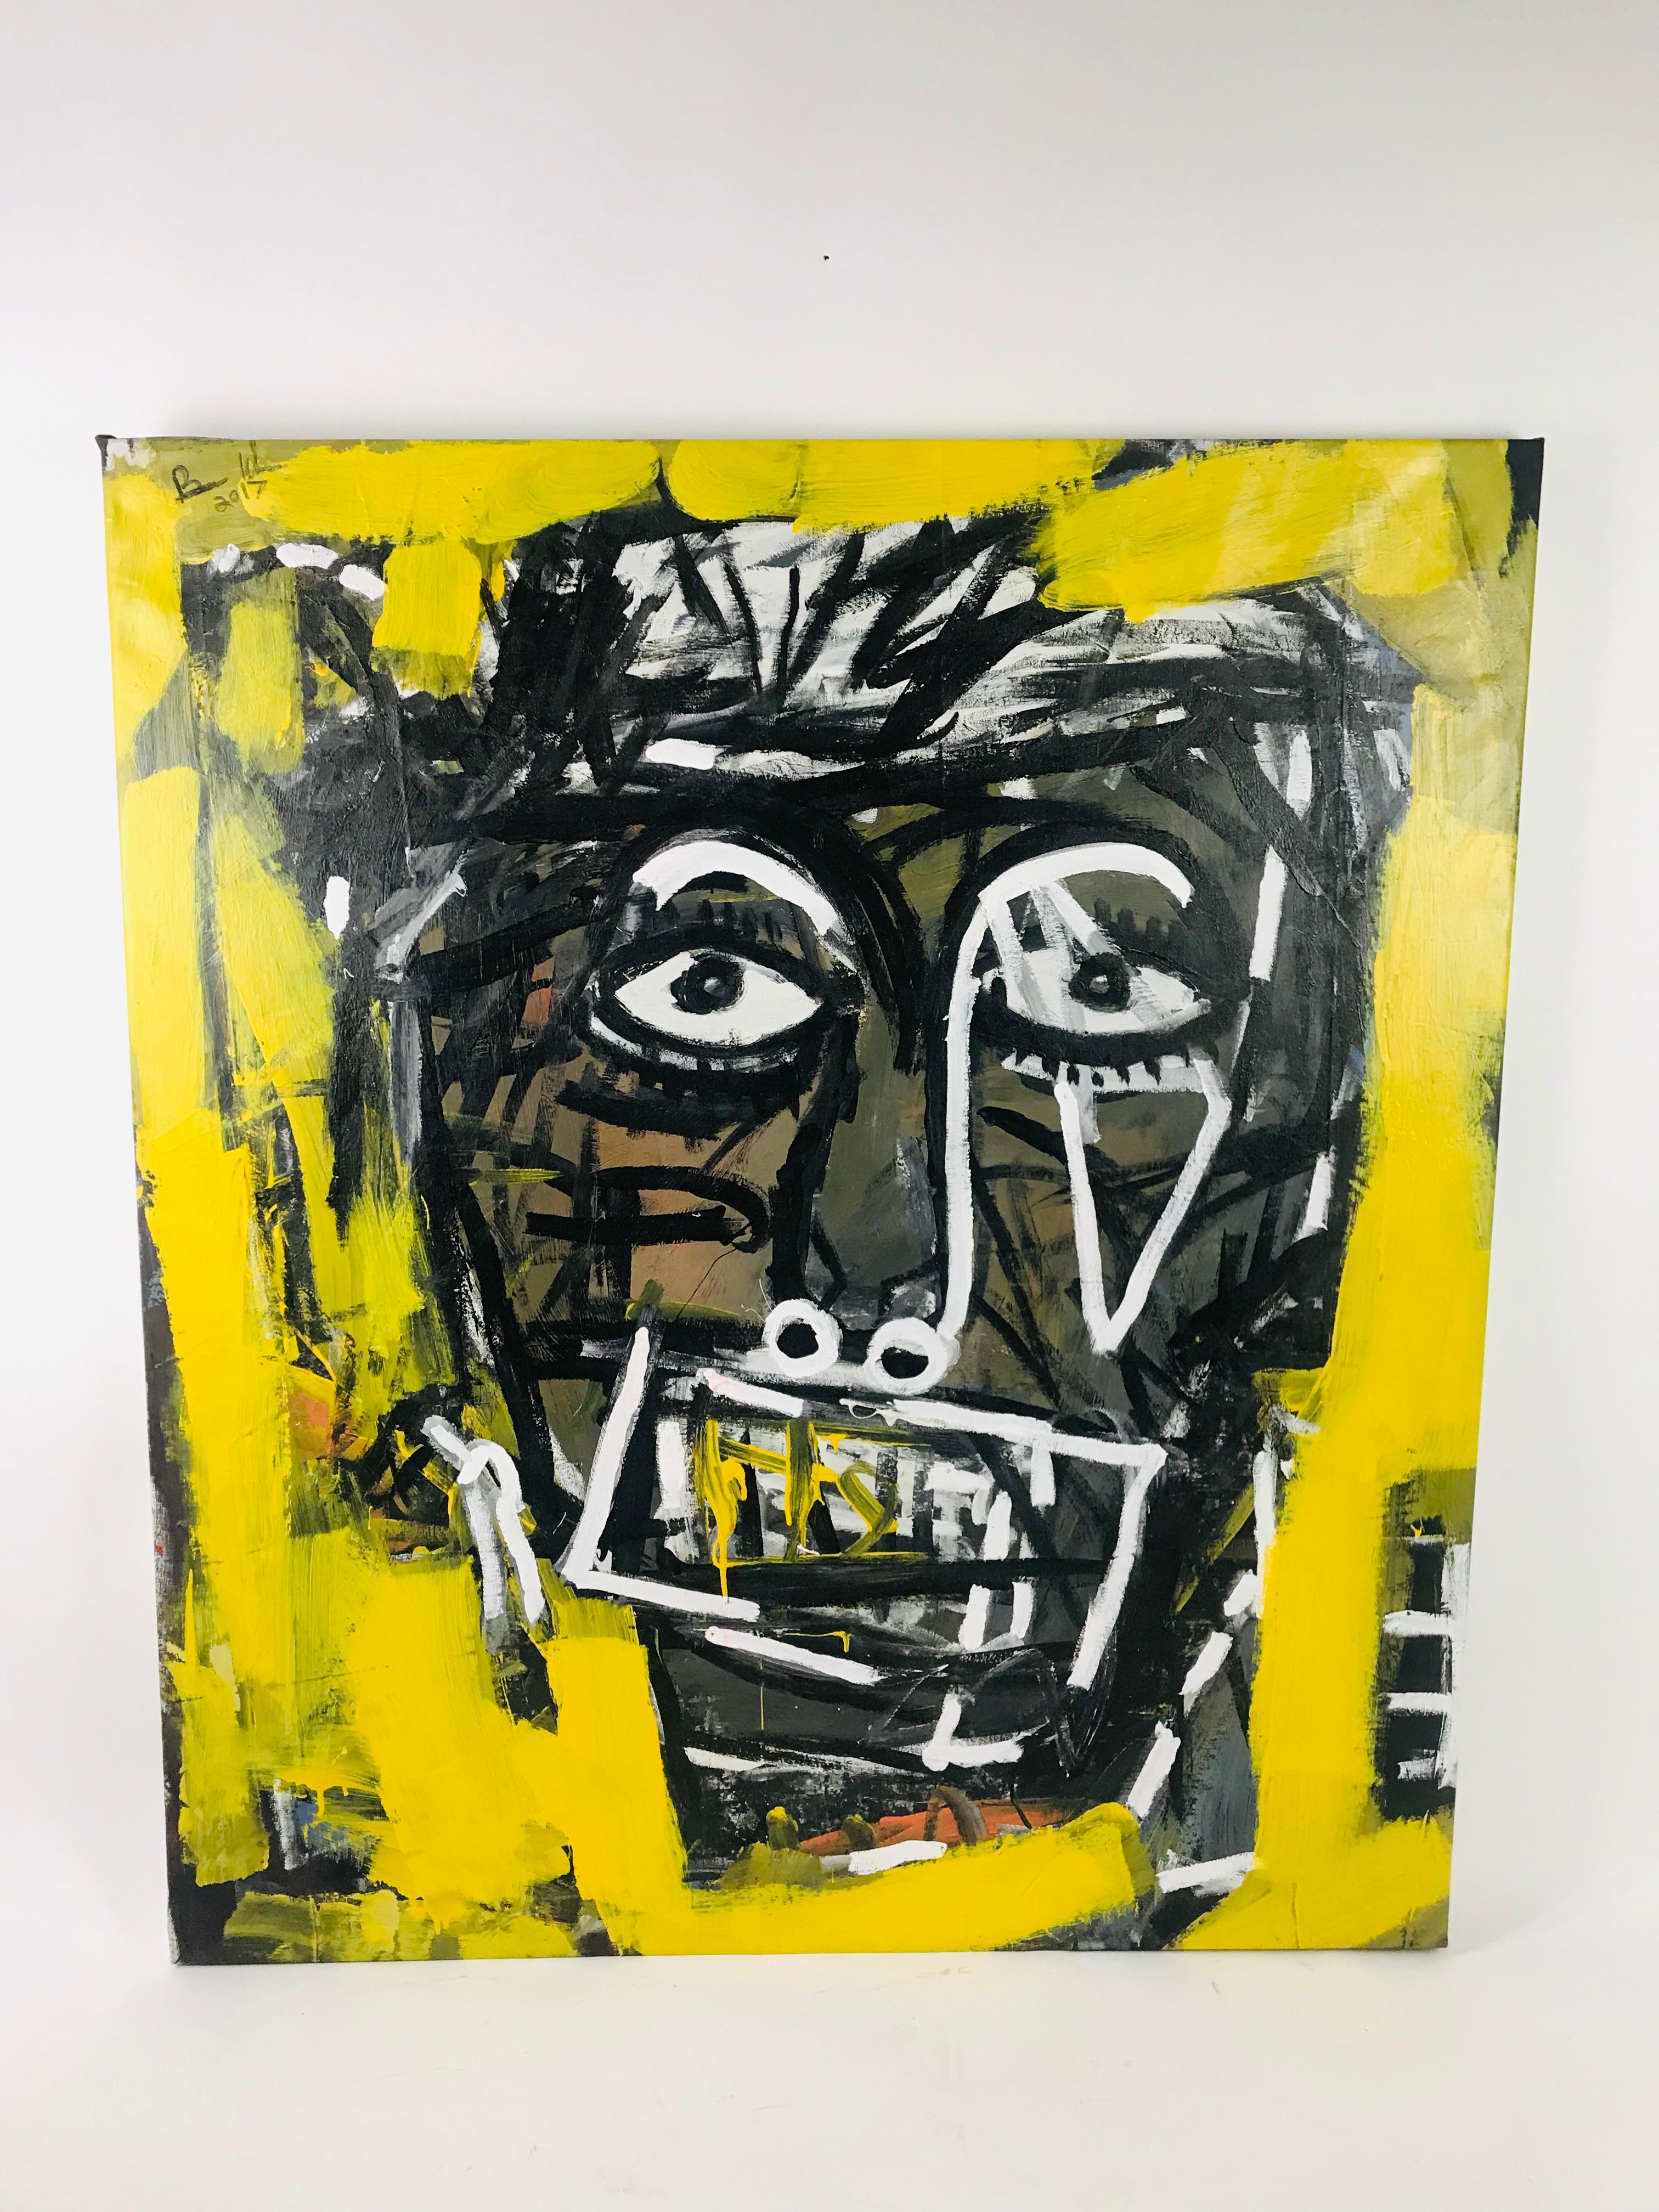 Striking street art style abstract of man in yellow and black acrylic on canvas by local Boston artist Brian Whalen signed and dated 2017 upper right.
Condition: Good condition. Unframed
Dimensions:
Height 46